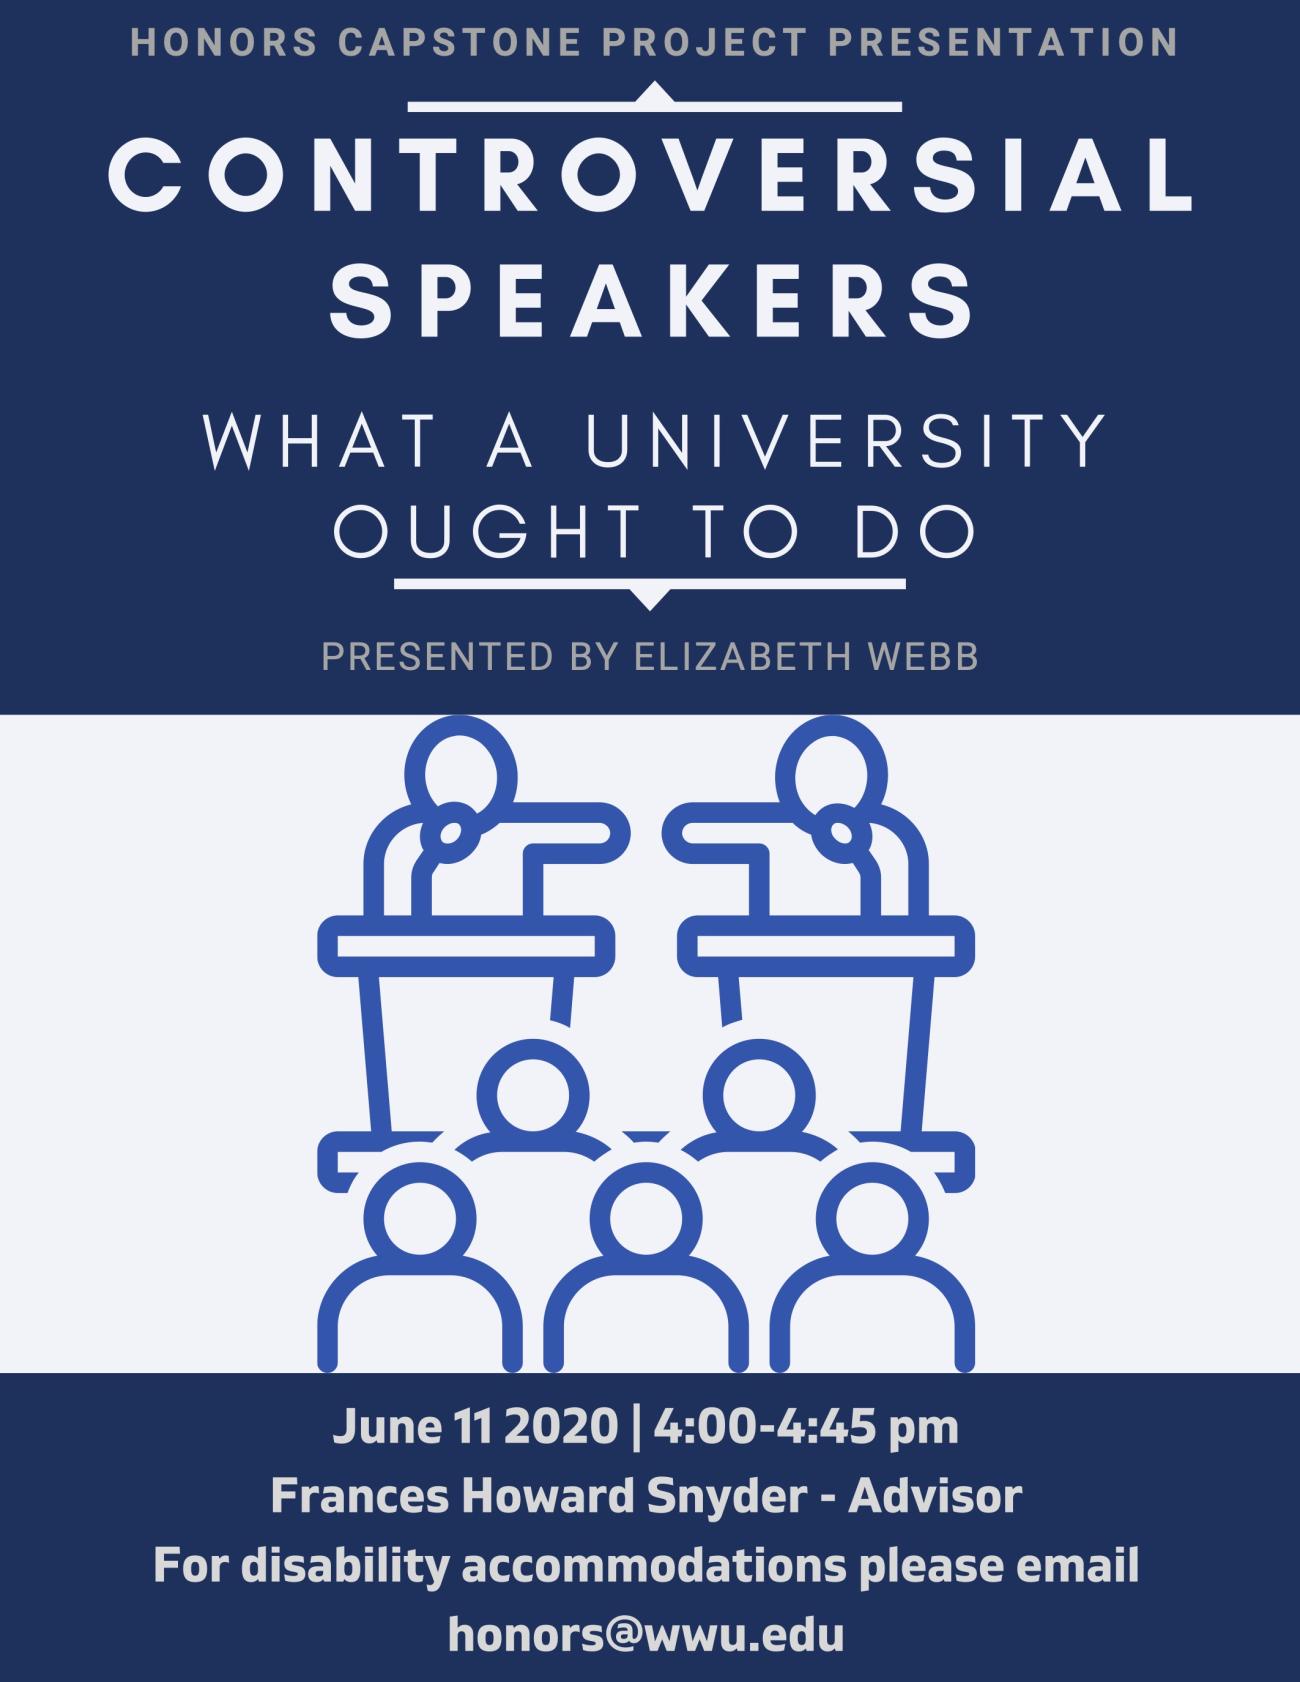 Image of two animated speakers on a stage at podiums with hands pointed toward one another with five animated audience members. Text: "Honors Capstone Project Presentation" "Controversial Speakers" "What a university ought to do" "Presented by Elizabeth Webb" "June 11 2020. 4:00-4:45 pm" "Frances Howard Snyder - Advisor" "For disability accommodations please email honors@wwu.edu"